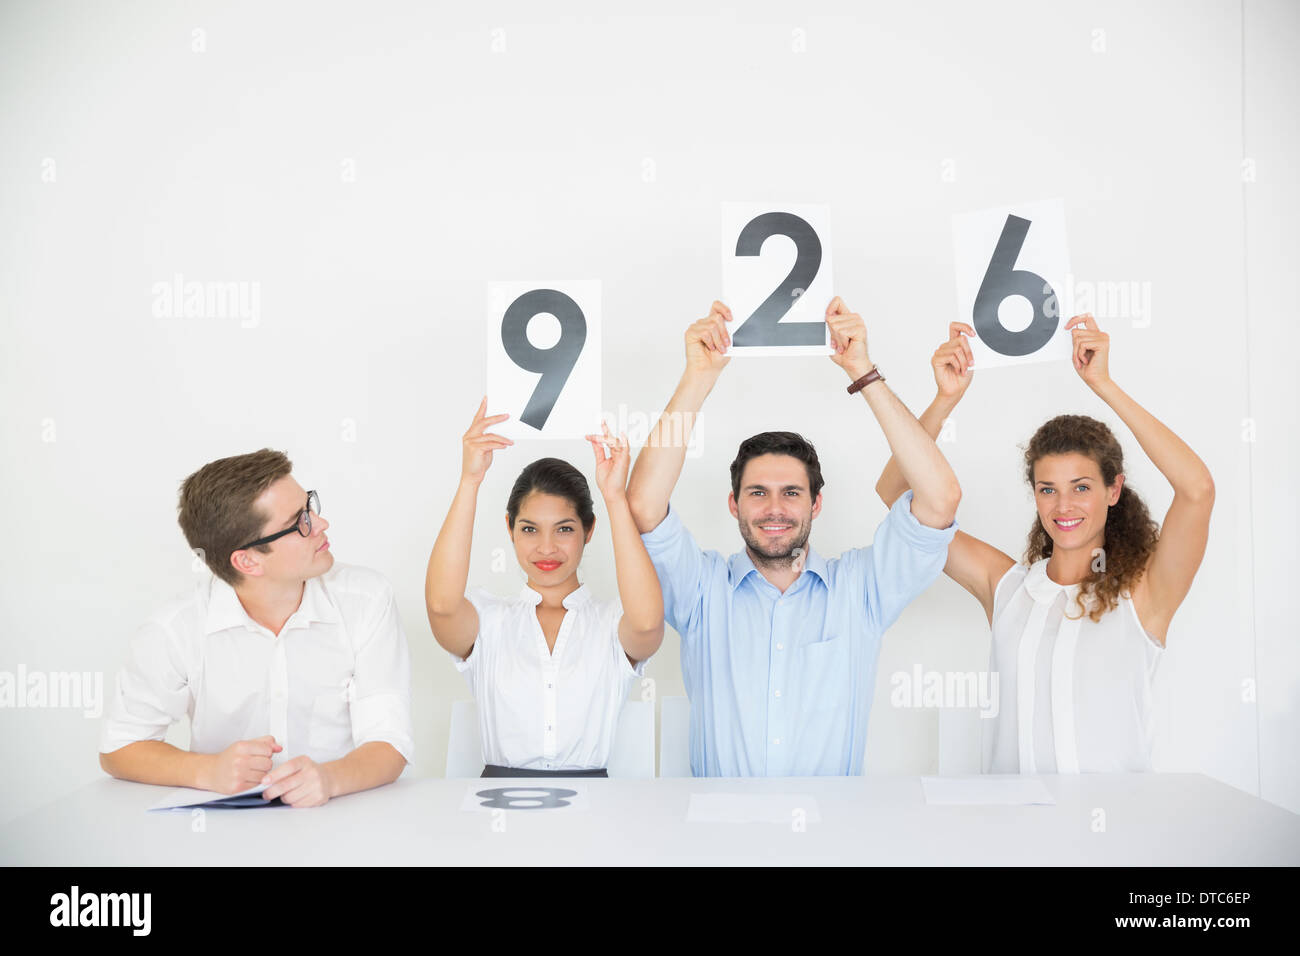 Business people holding score signs Stock Photo